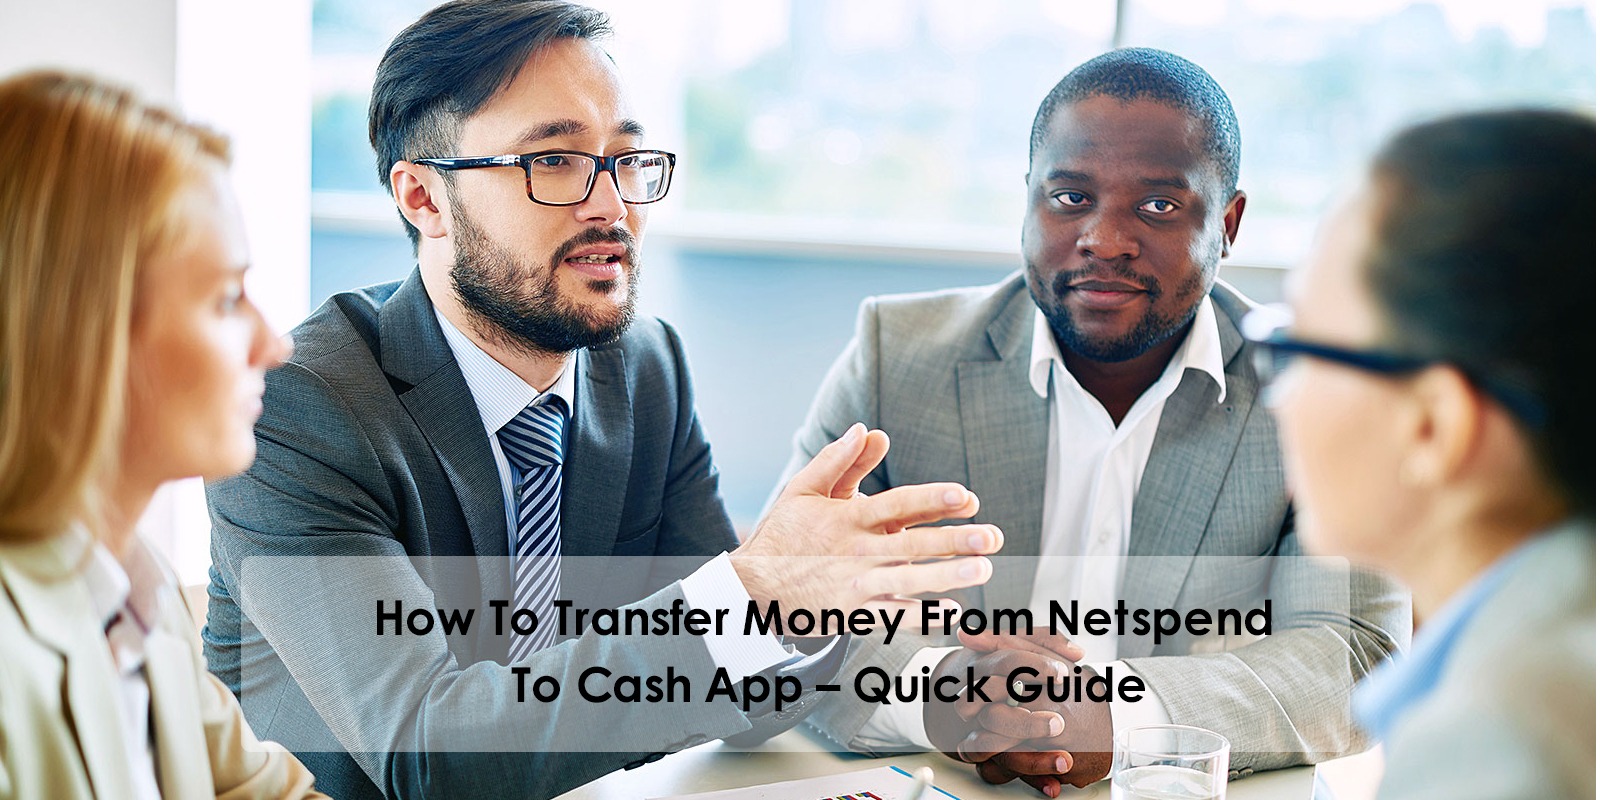 How To Transfer Money From Netspend To Cash App - Quick Guide